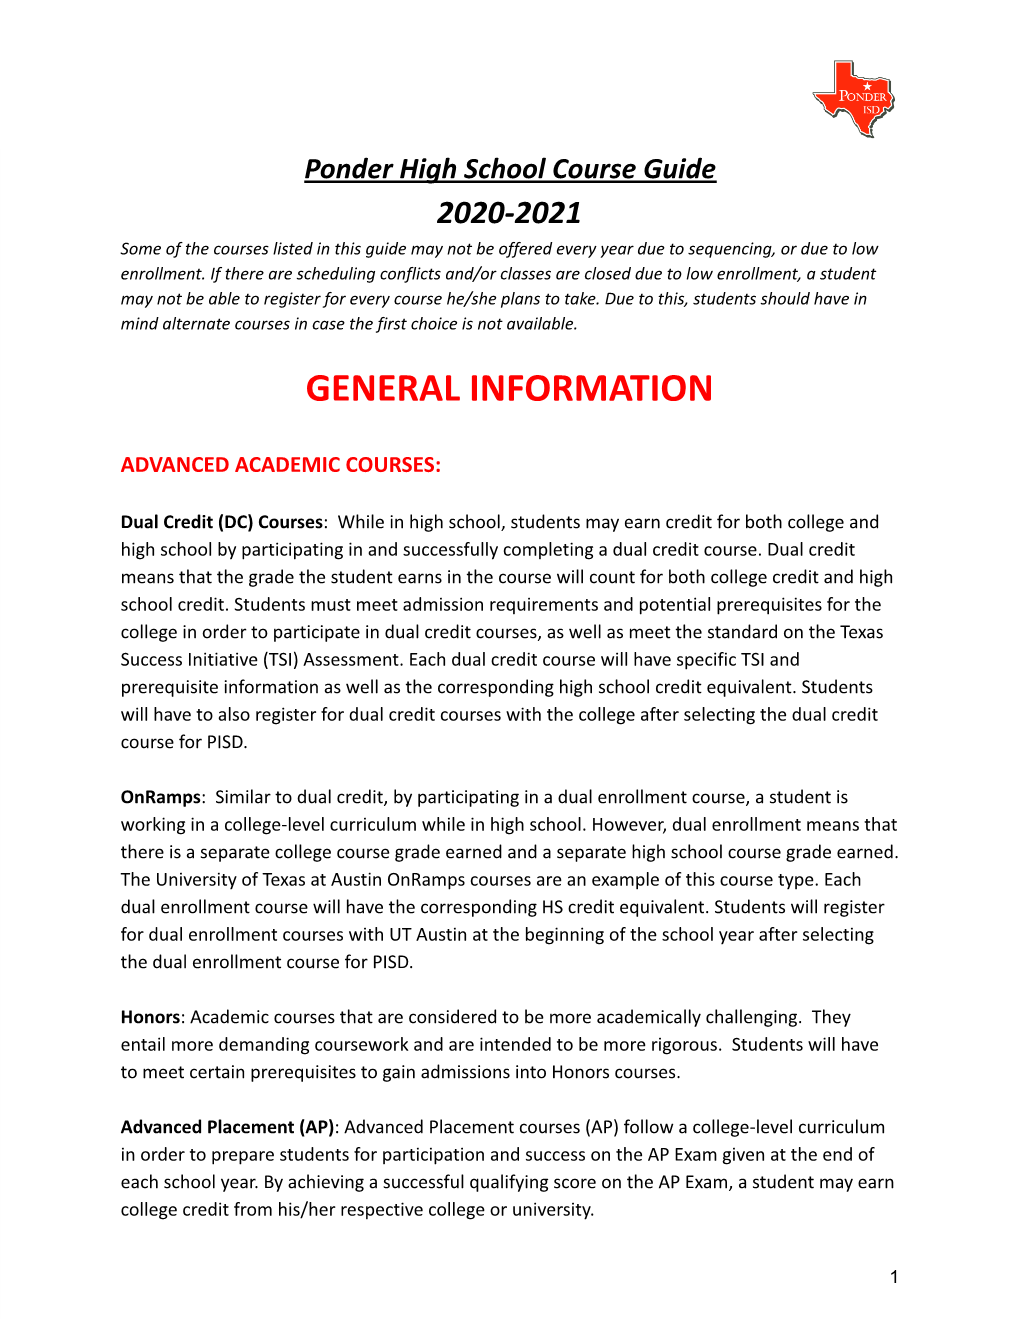 Ponder High School Course Guide for 2020-2021